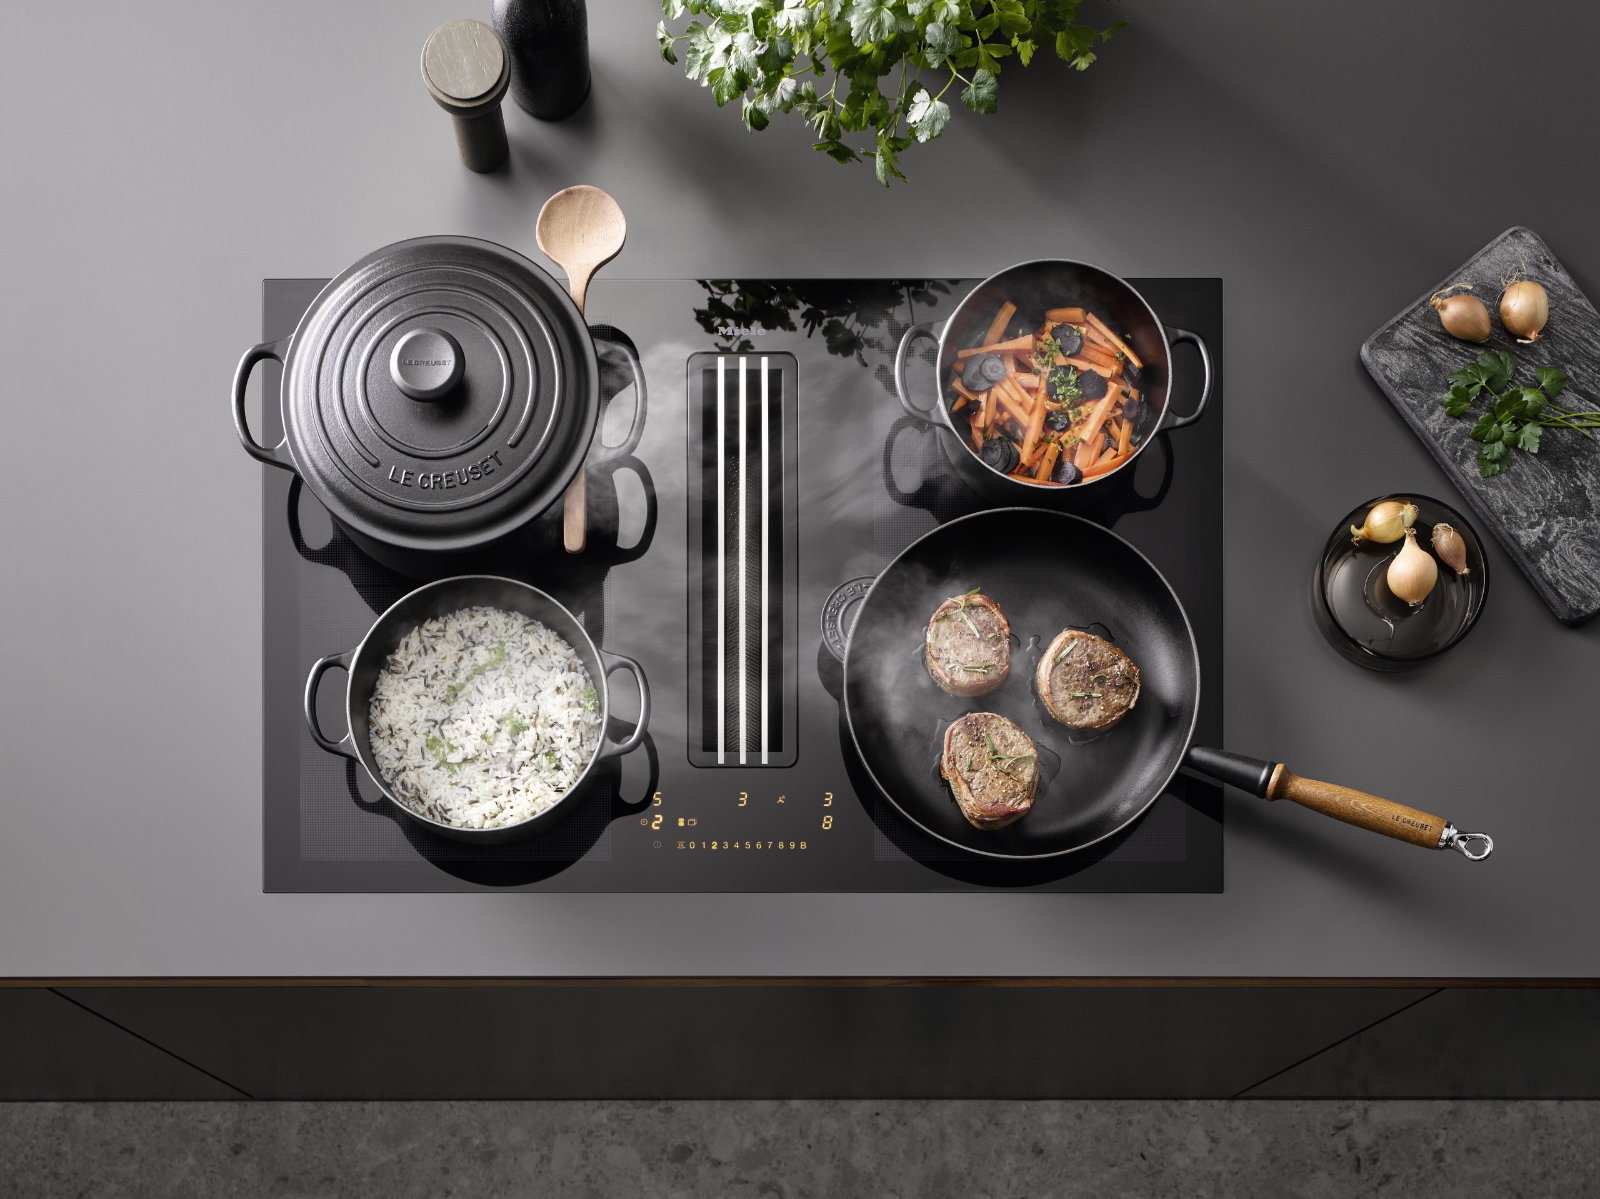 Sophisticated design and functionality with the new Miele 2in1 induction hob 